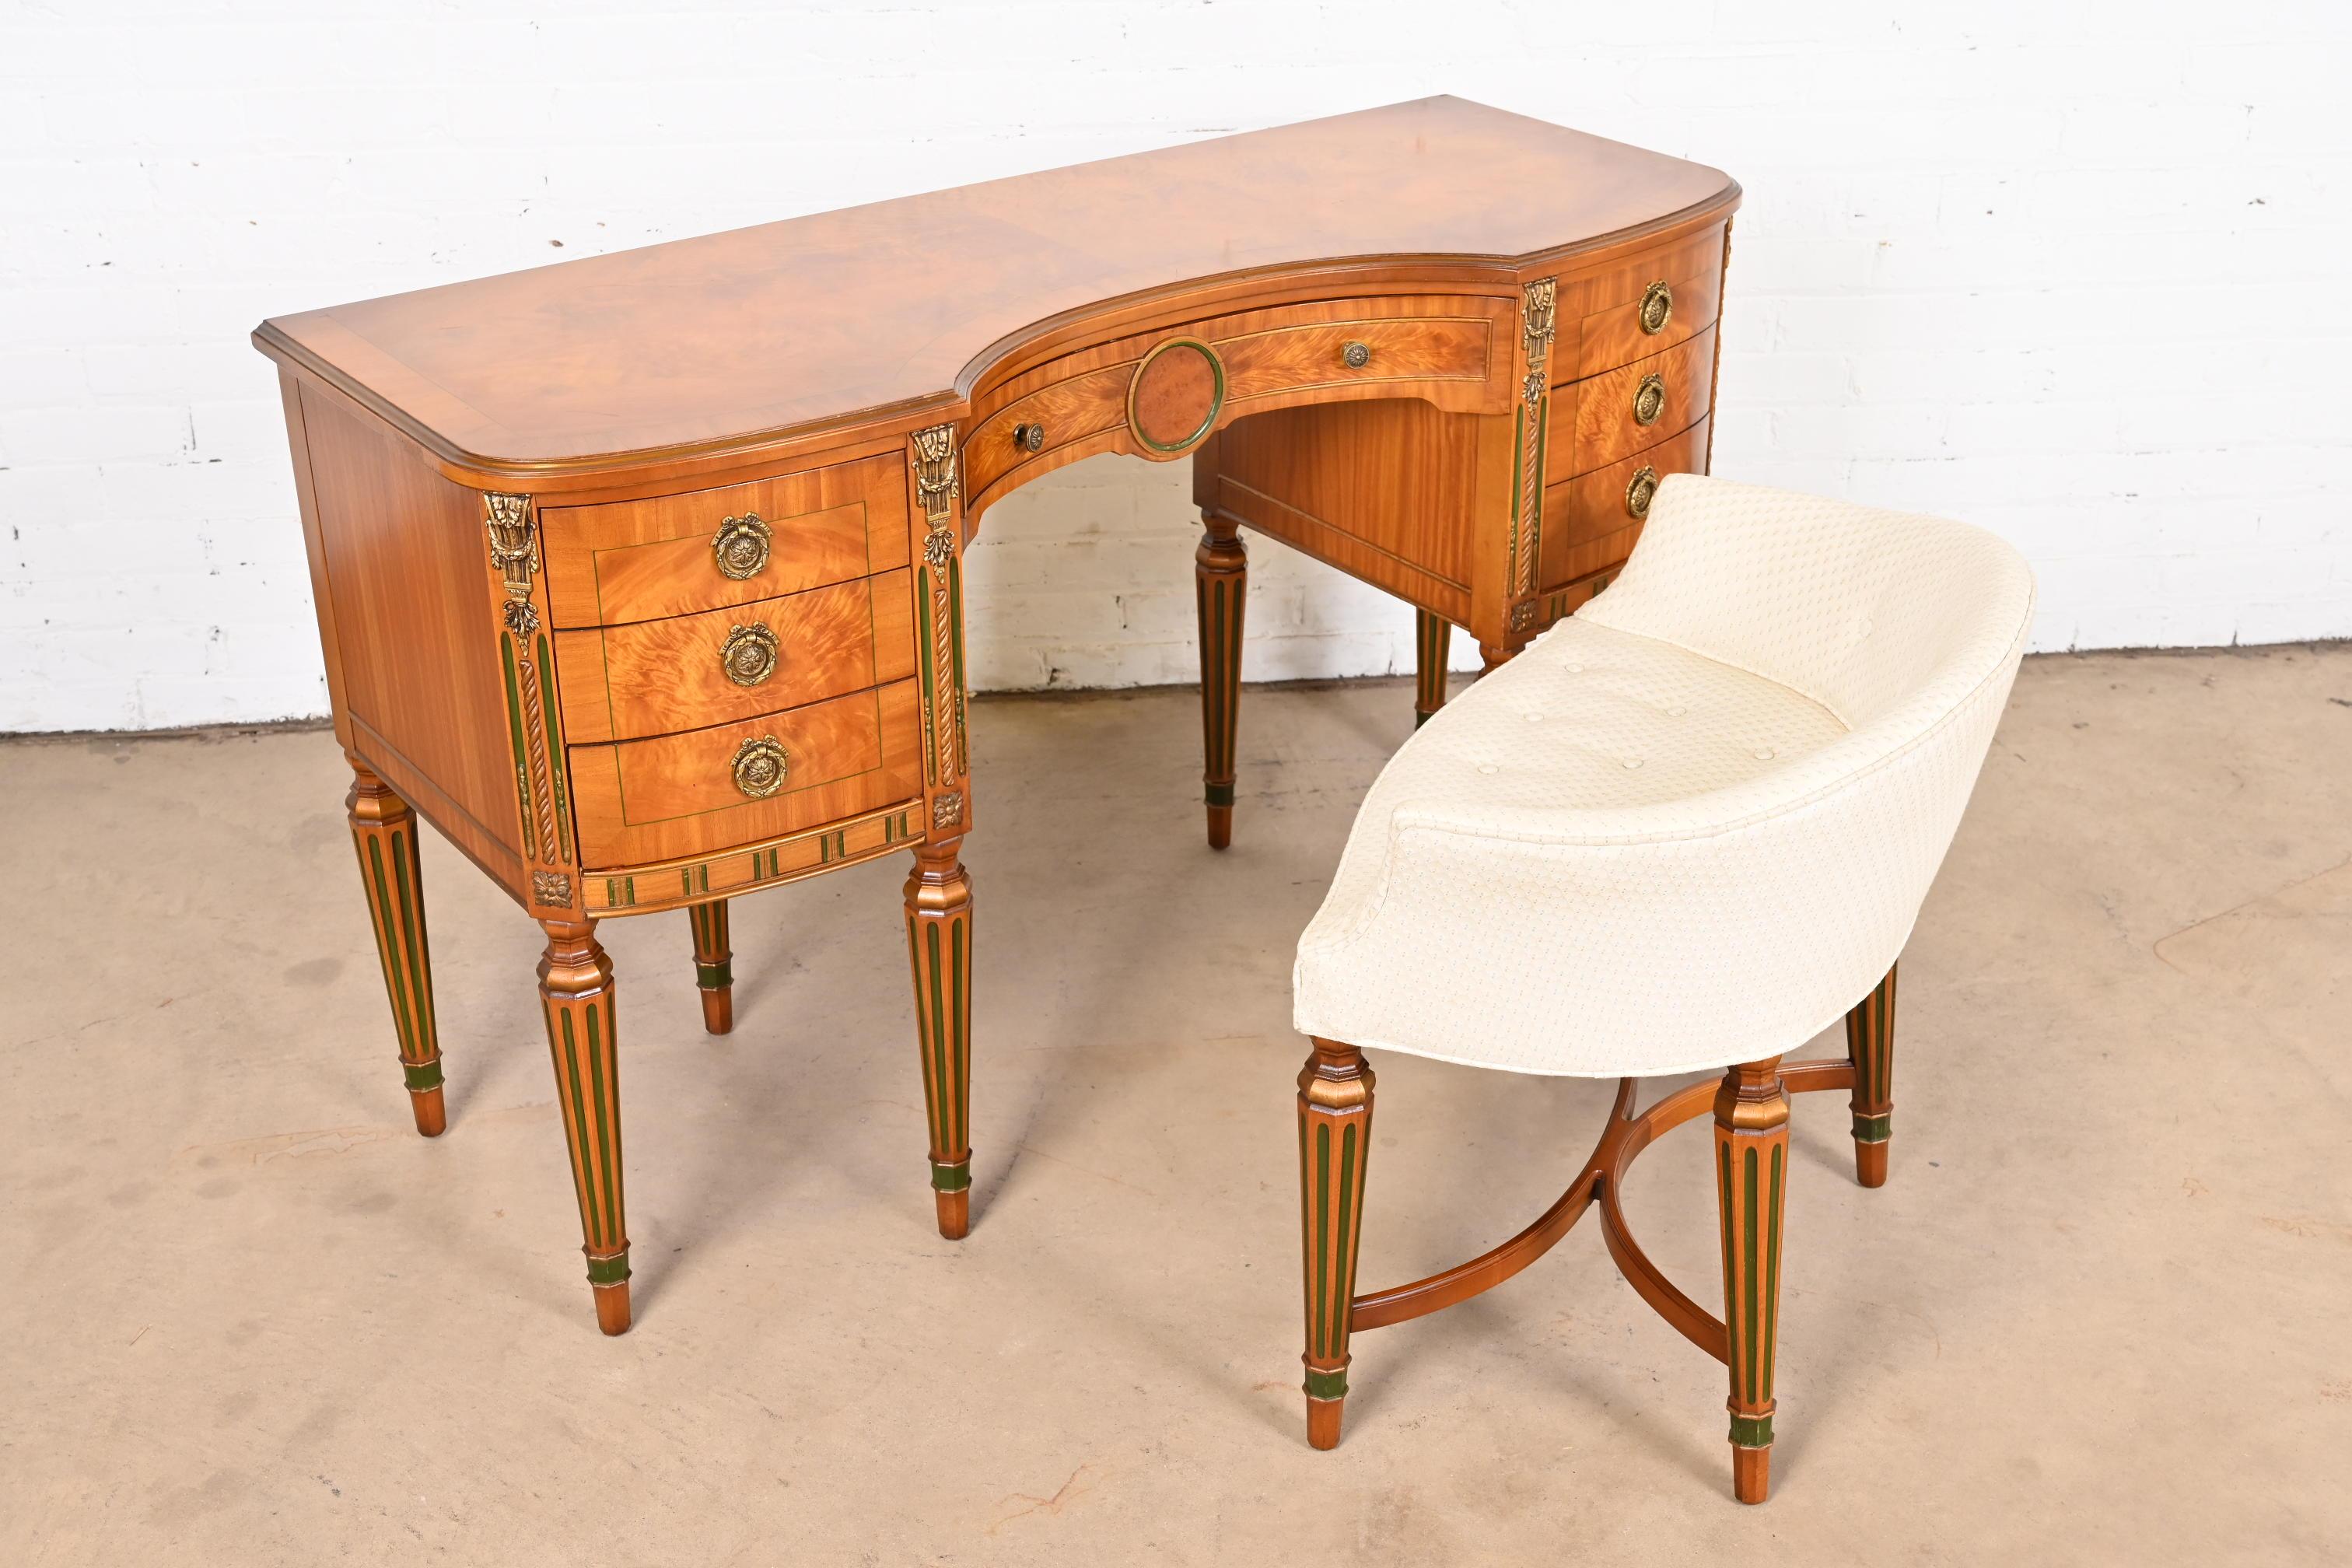 20th Century French Regency Louis XVI Satinwood Vanity With Bench Attributed to Romweber